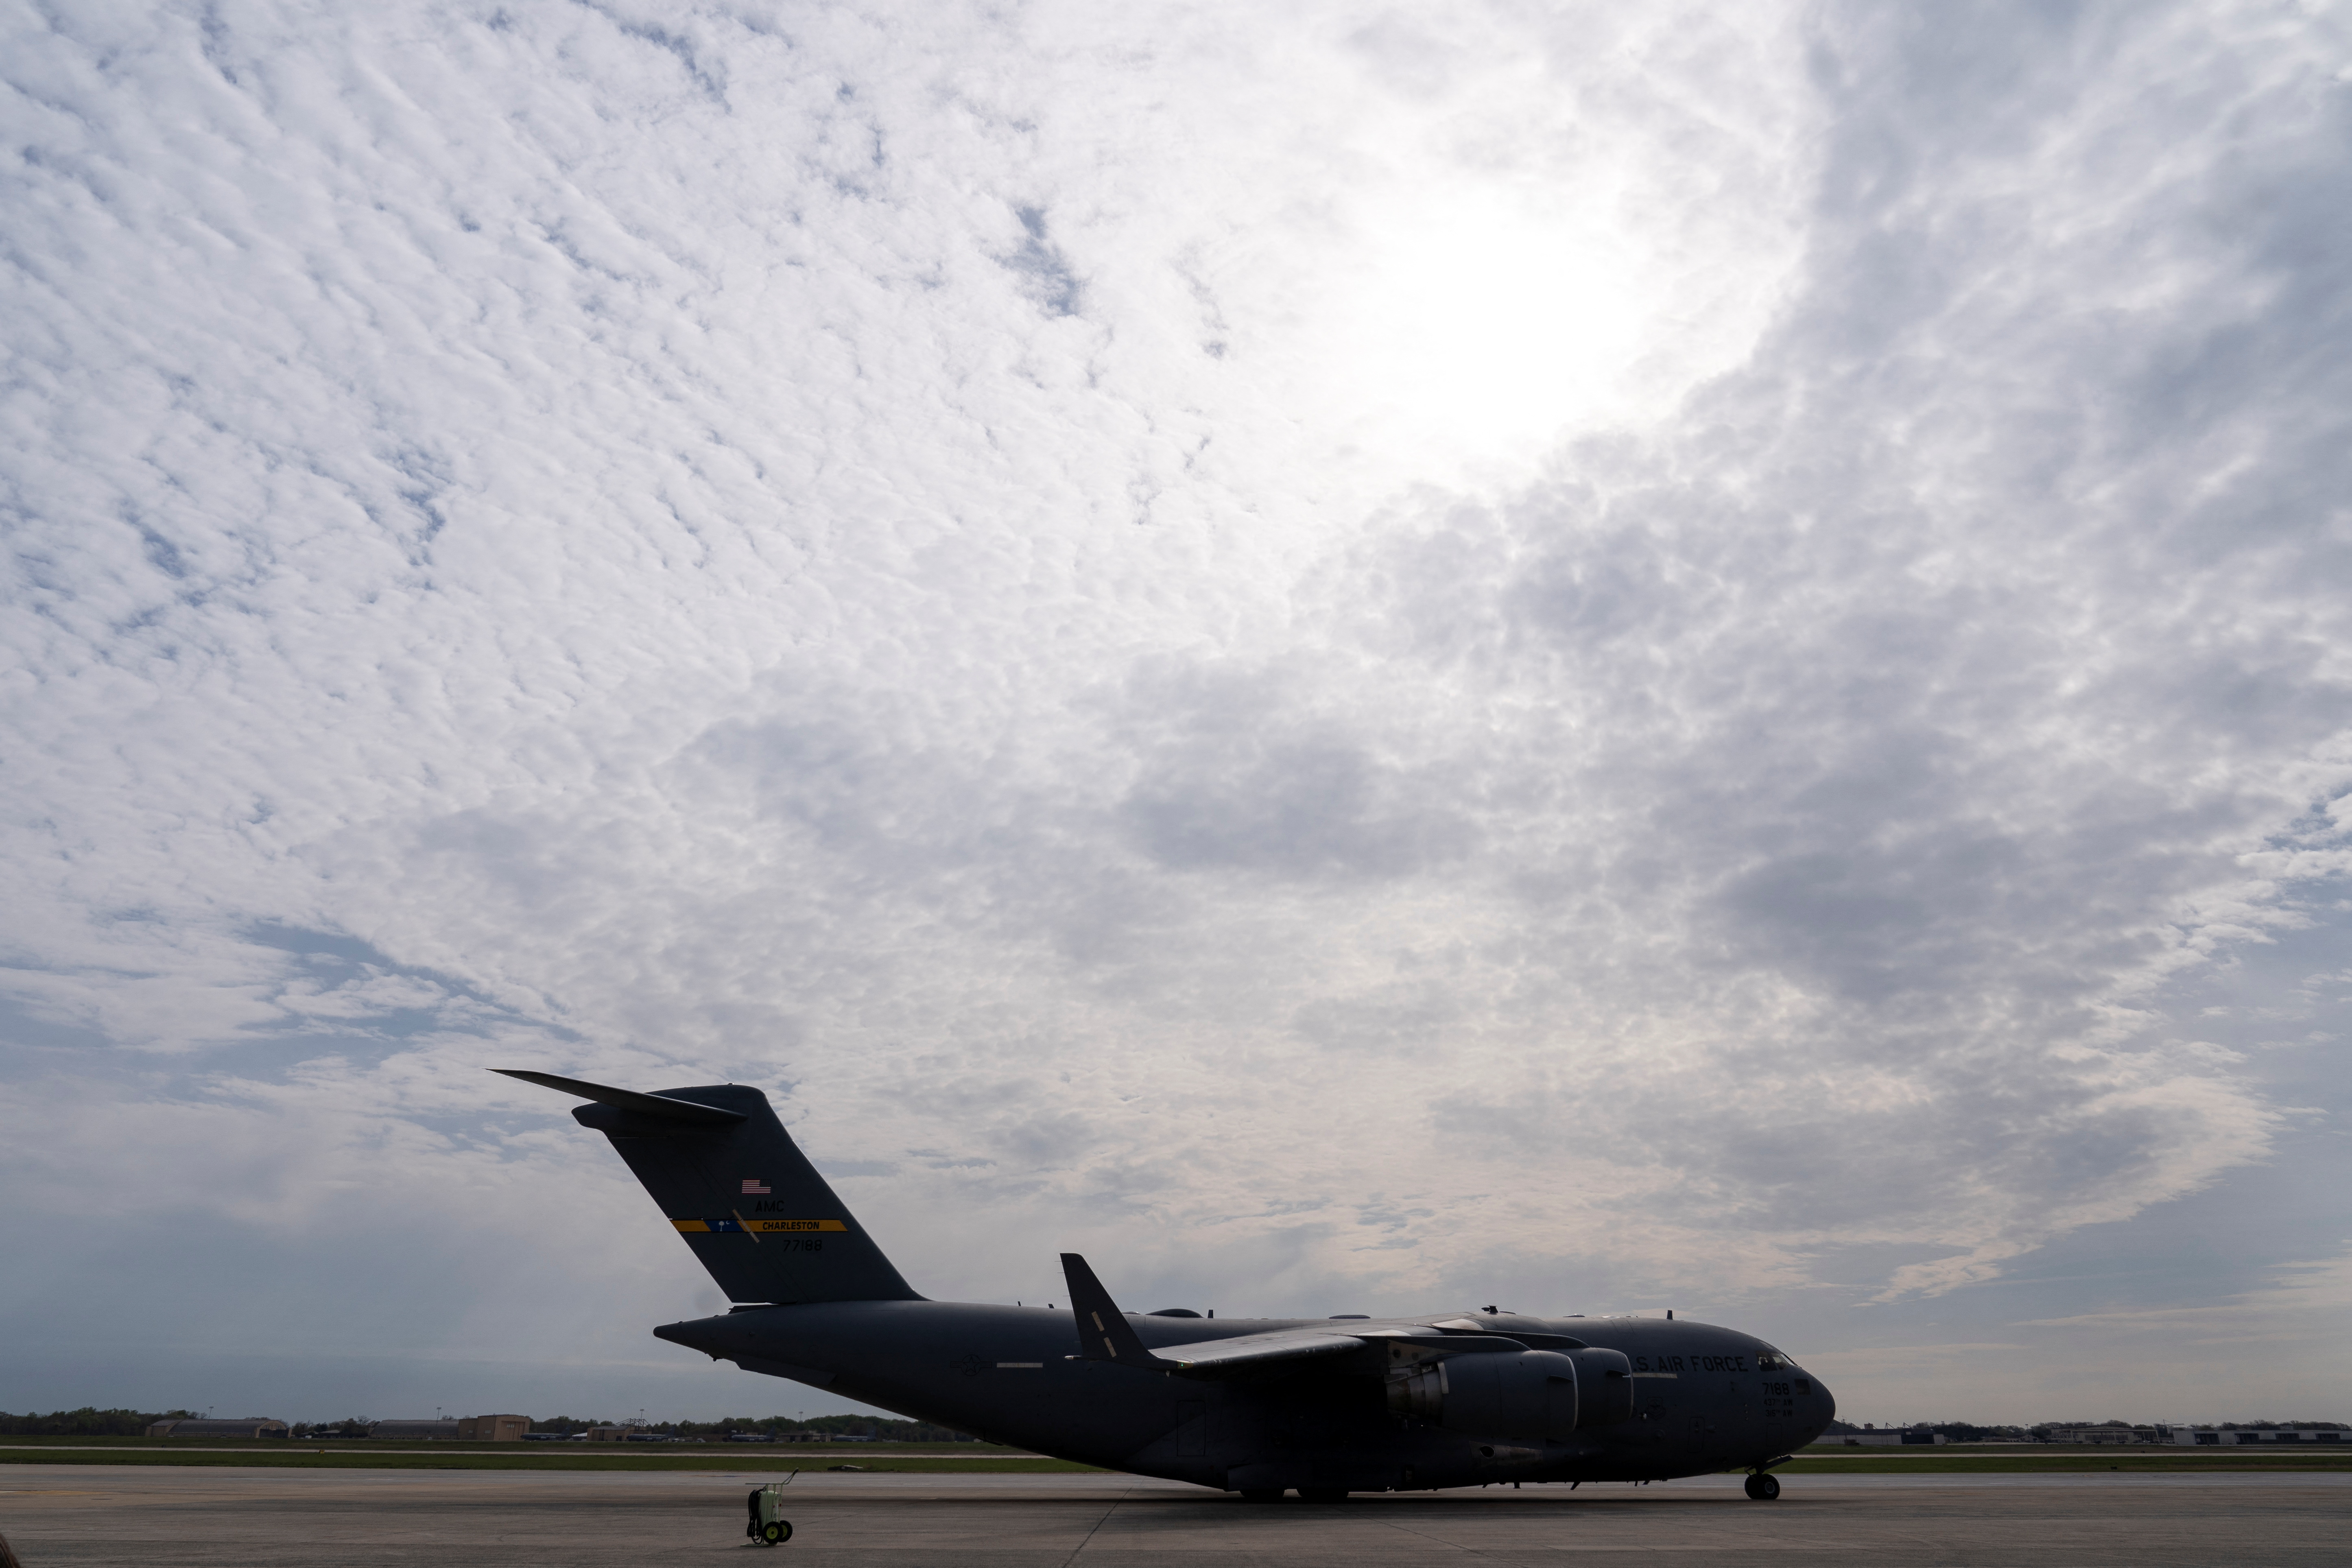 A plane carrying U.S. Secretary of Defense Lloyd Austin taxis for takeoff at Joint Base Andrews, in Maryland